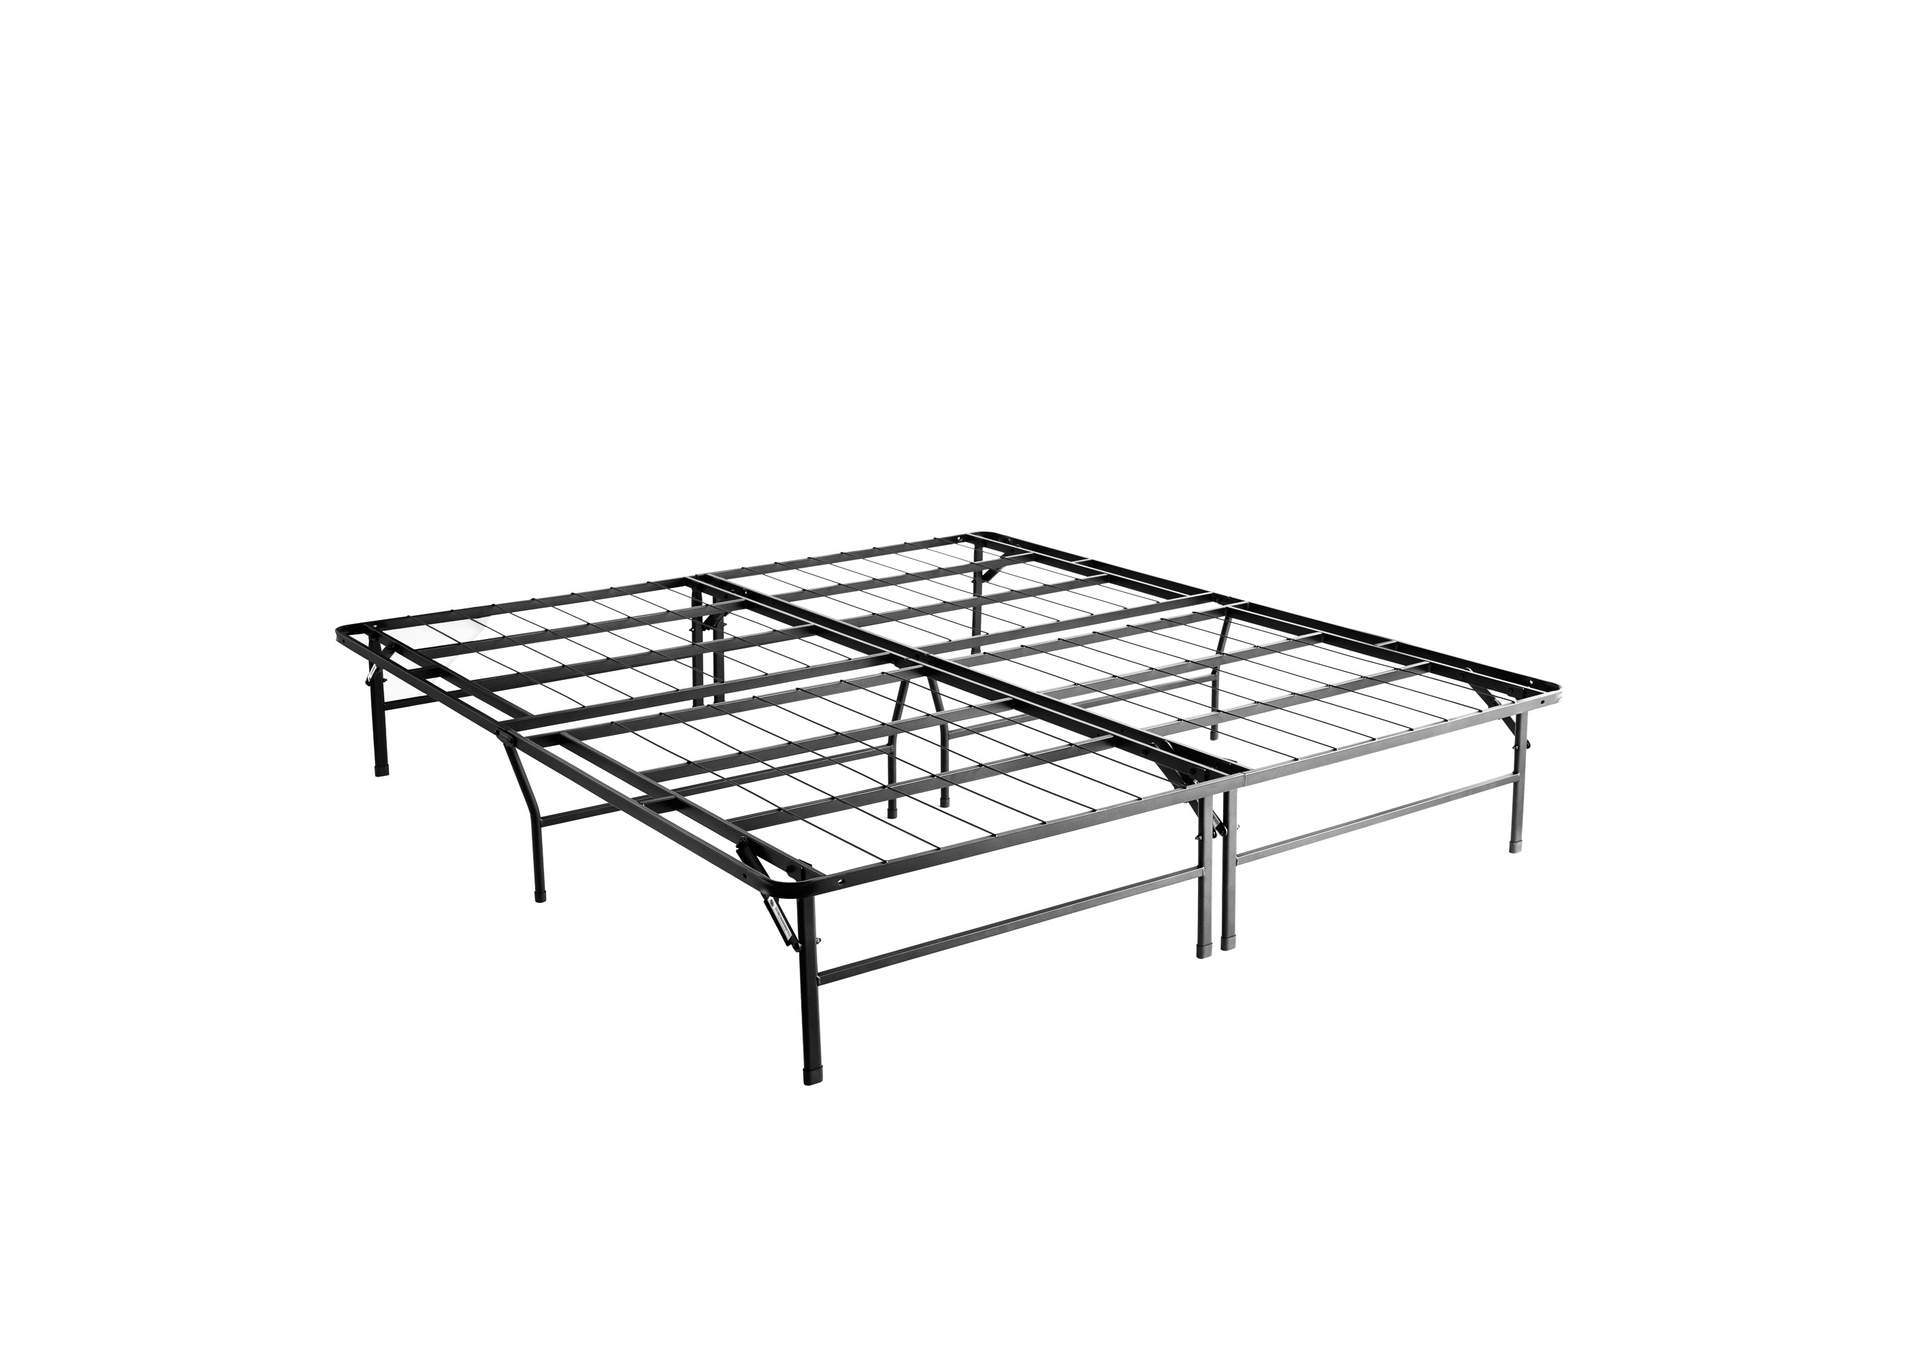 Malouf Structures Highrise HD Bed 14" Frame - California King Size,Malouf